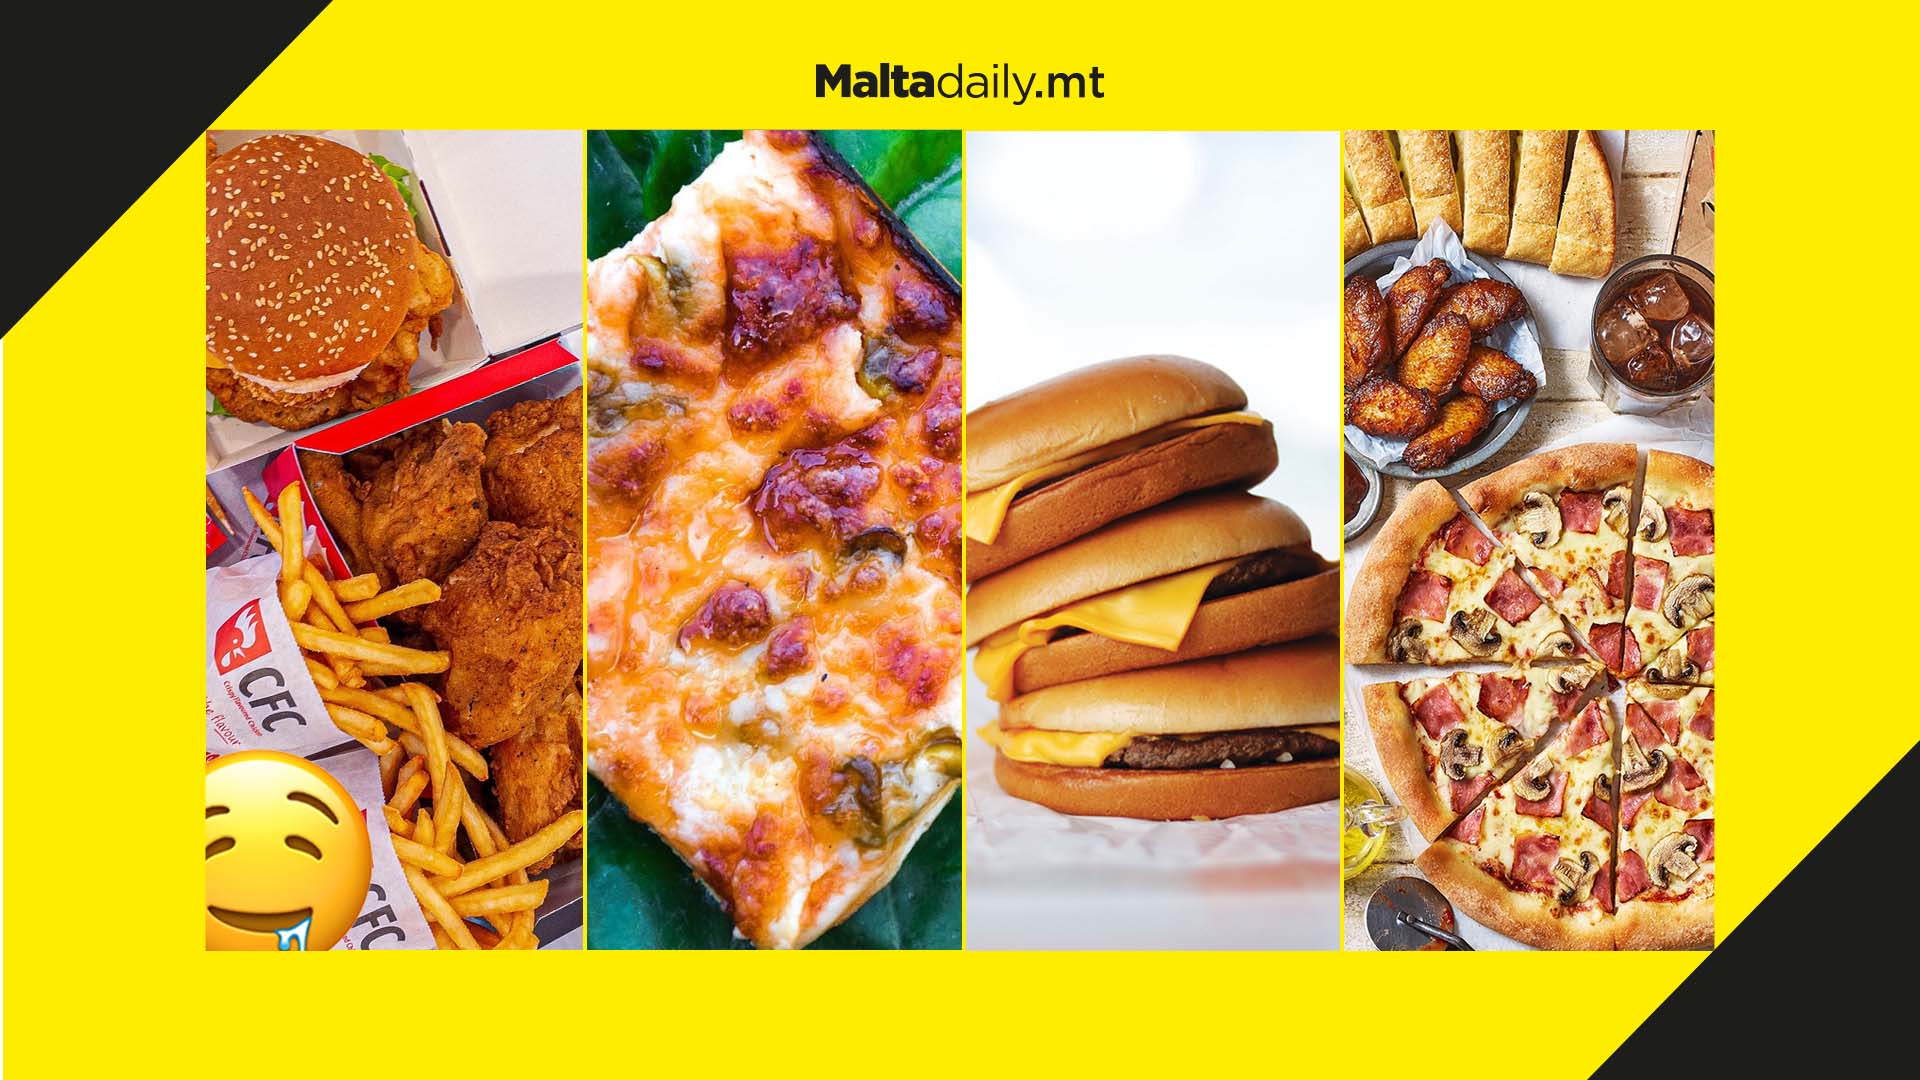 Happy Fast Food Day! Here are 5 cheat day food spots you need right now